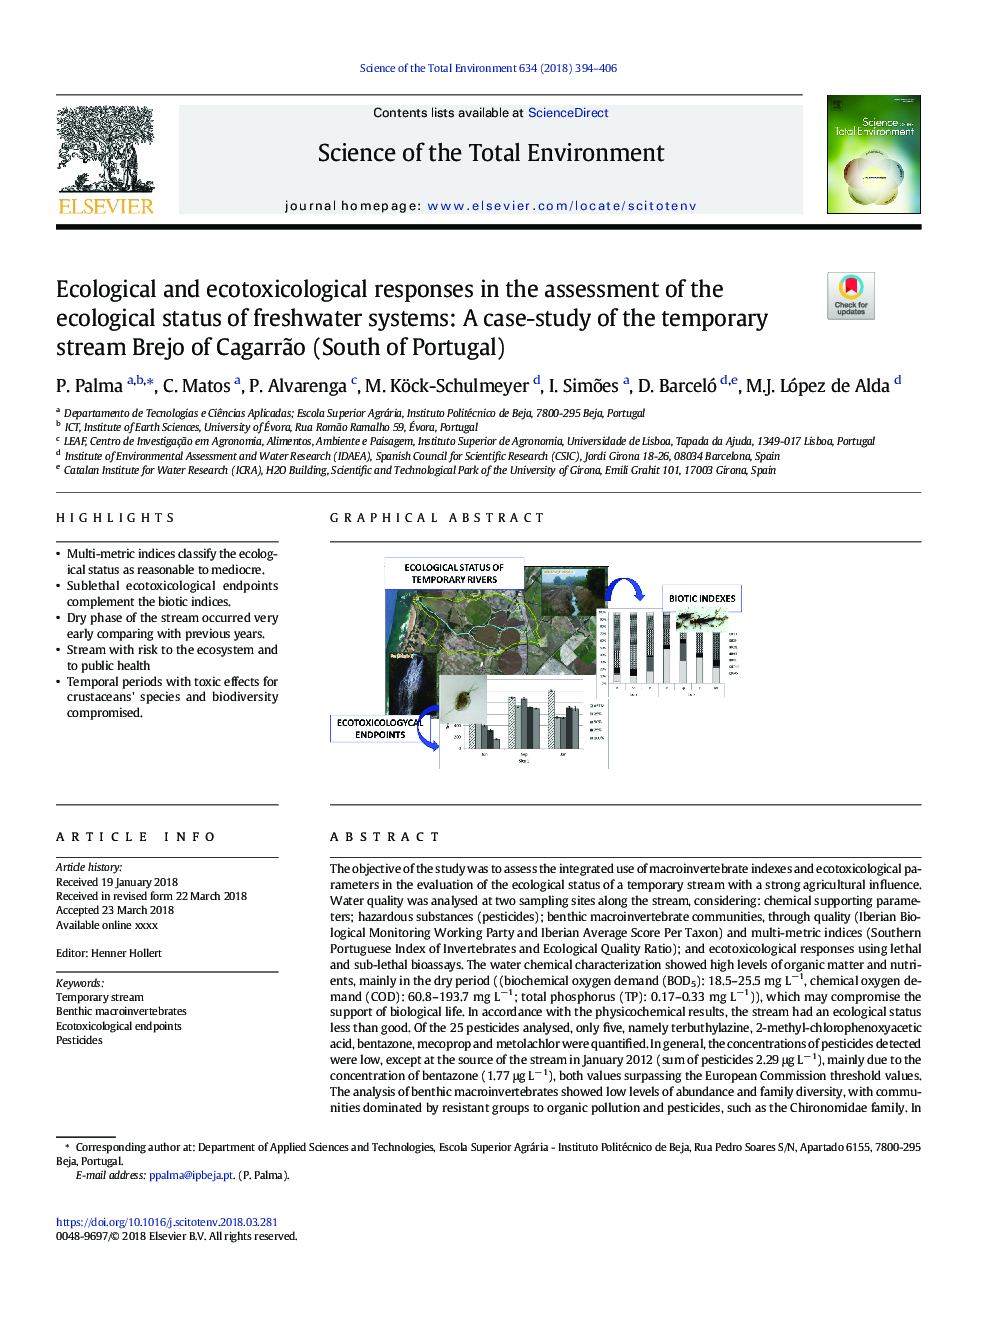 Ecological and ecotoxicological responses in the assessment of the ecological status of freshwater systems: A case-study of the temporary stream Brejo of CagarrÃ£o (South of Portugal)